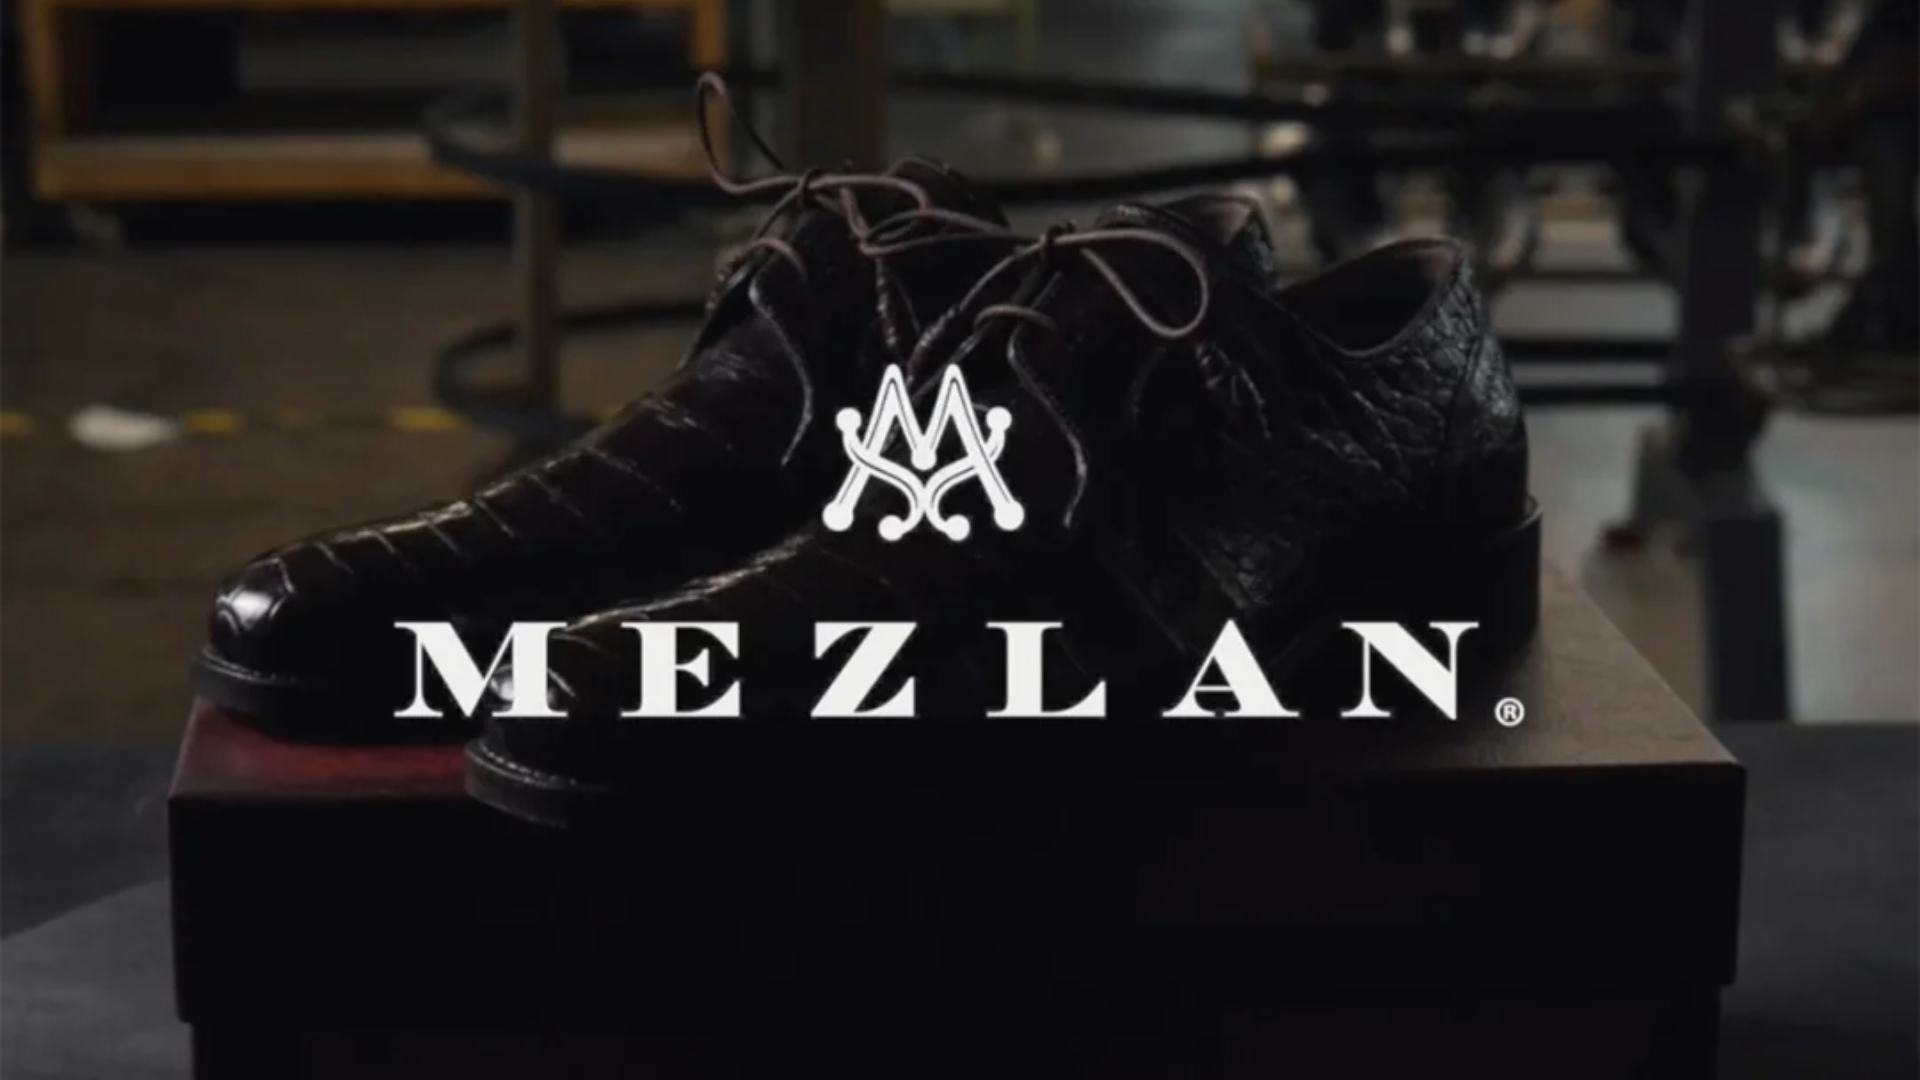 A Houston Shoe Palace: Mezlan Brings Service and Craftsmanship to an Industry That Can Often Be Pushy